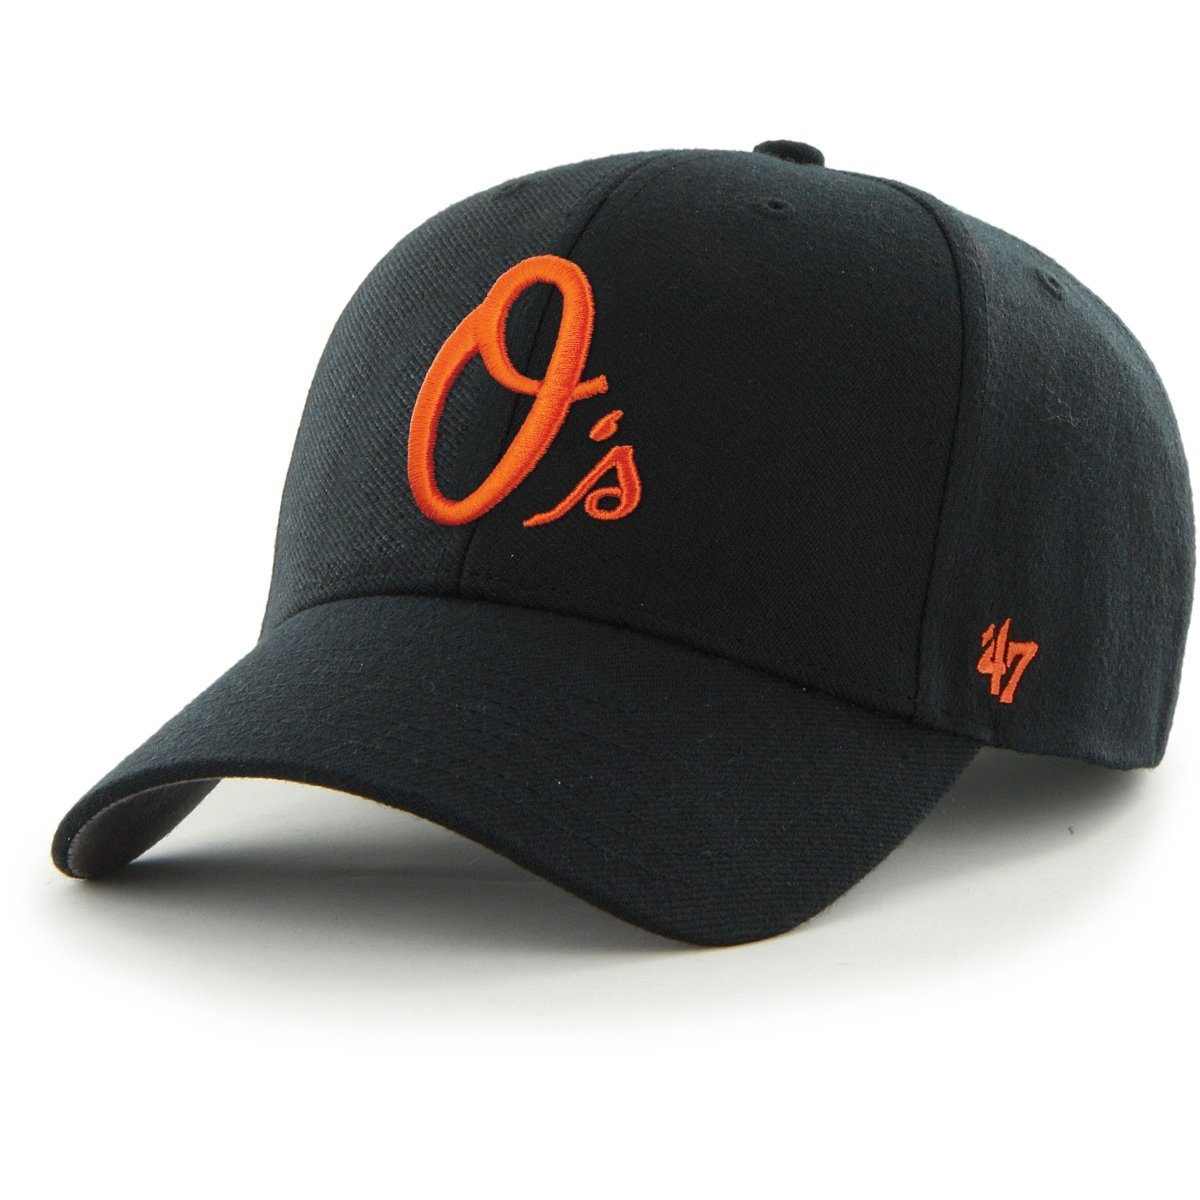 '47 Brand Trucker Cap Relaxed Fit MLB Baltimore Orioles